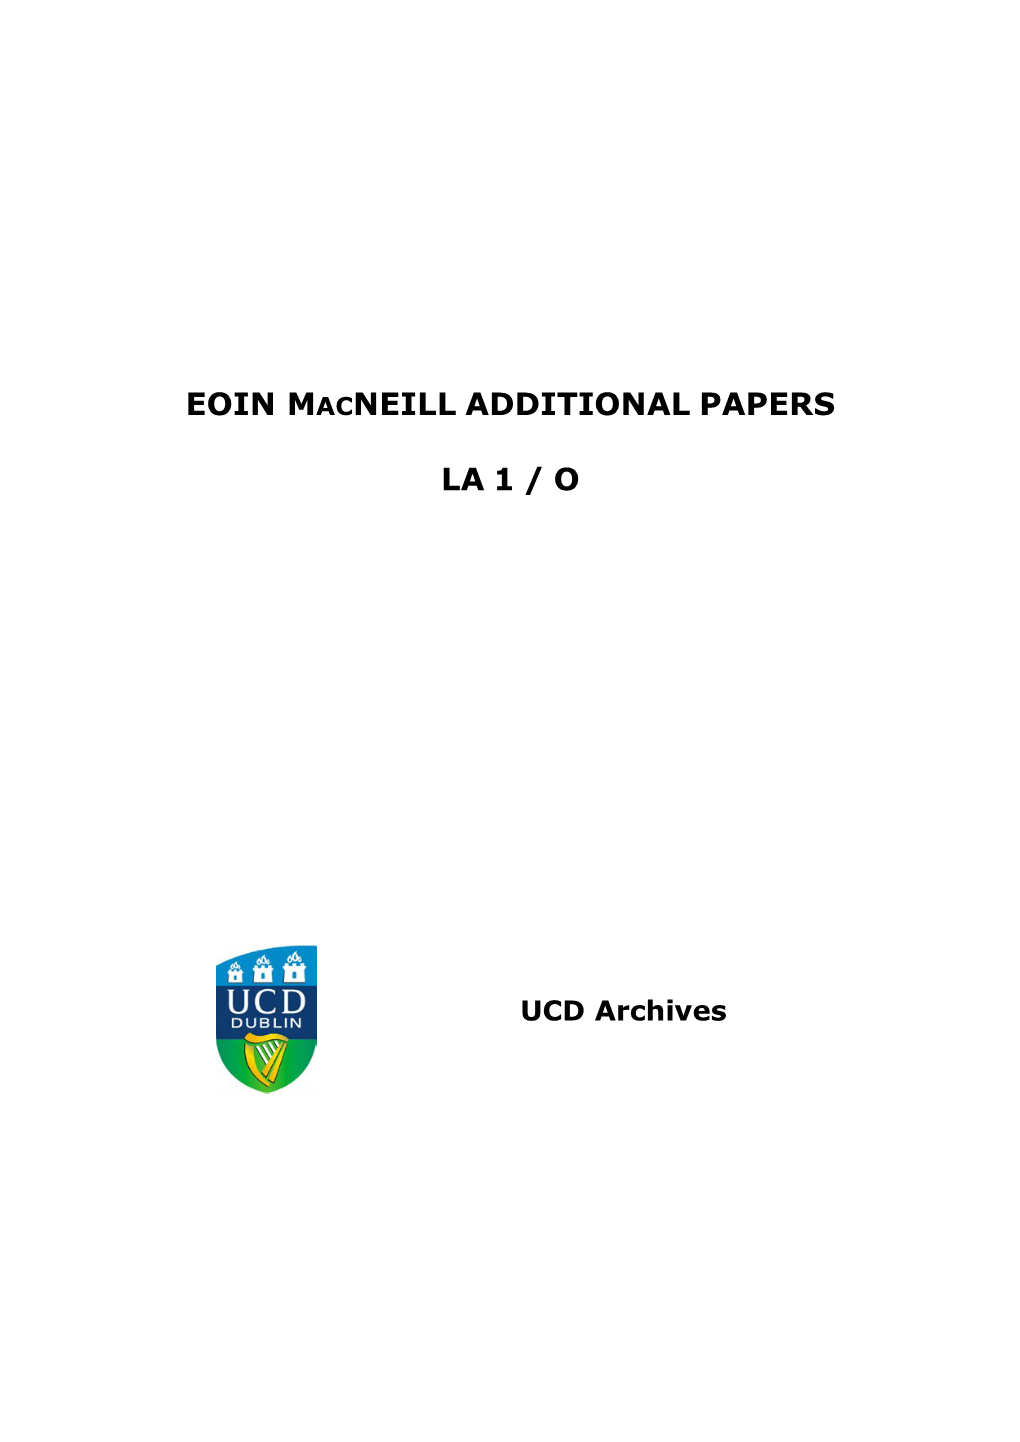 LA1/O Eoin Macneill Additional Papers